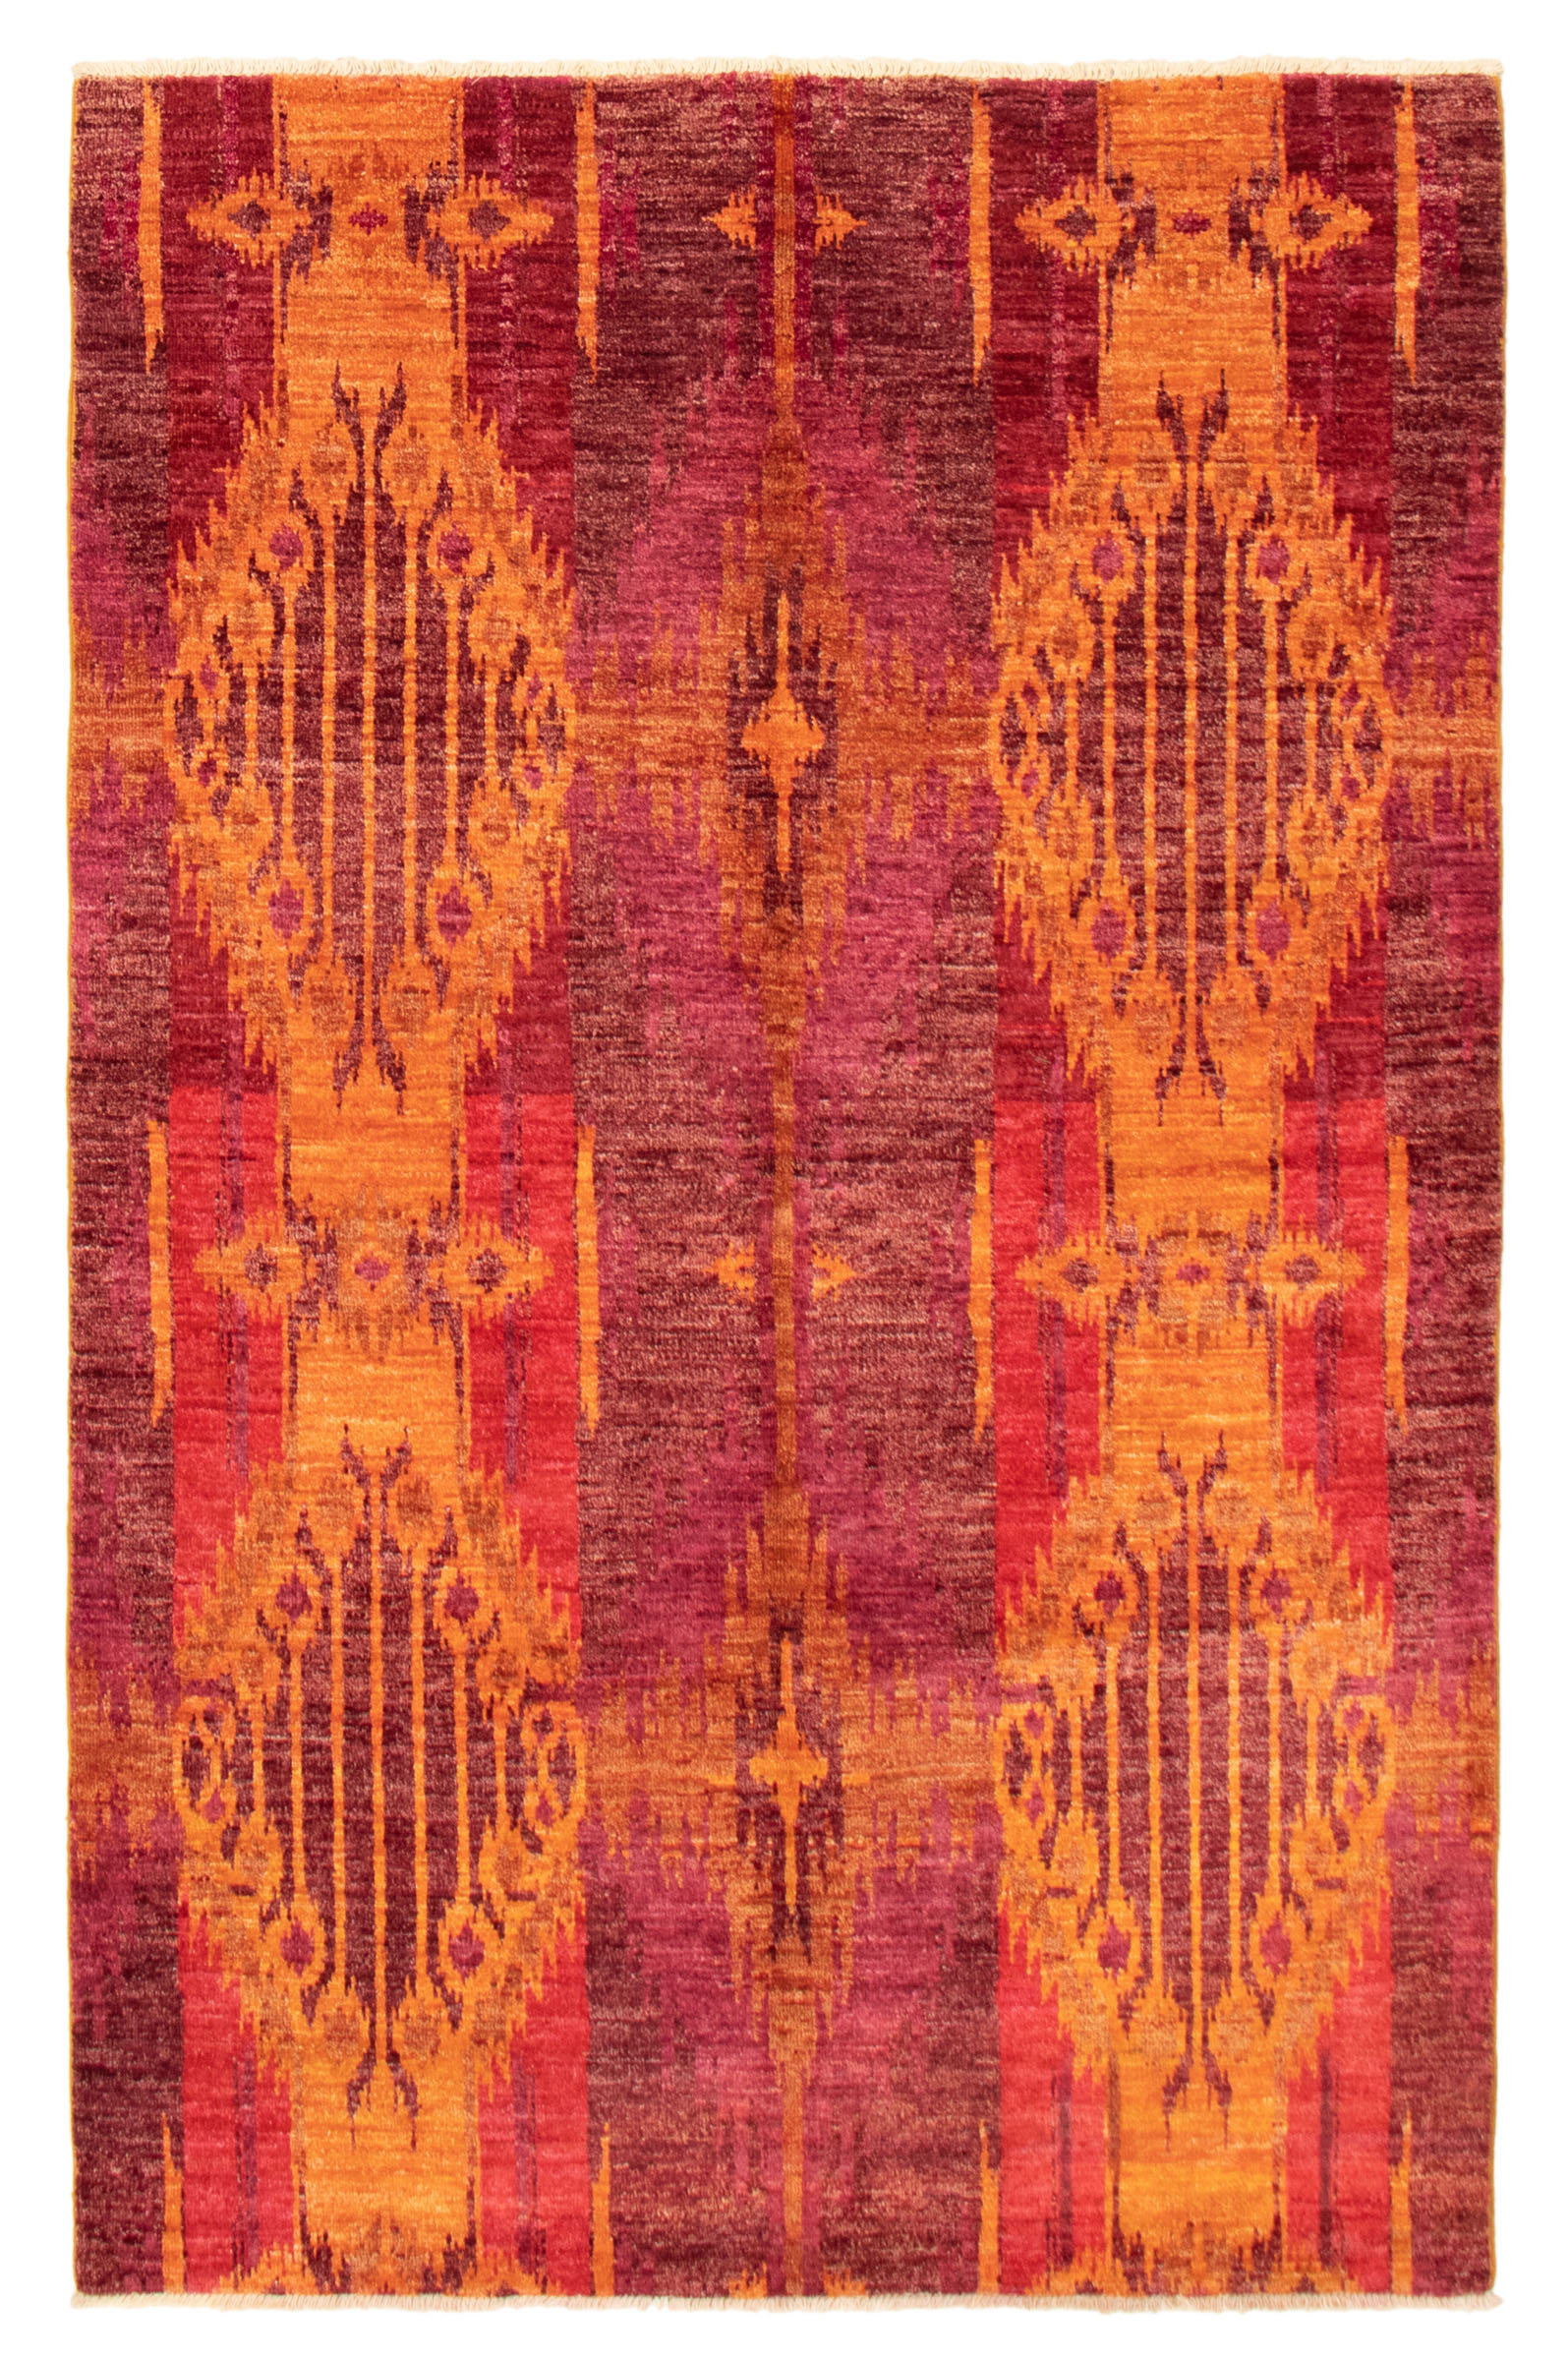 Hand-knotted Shalimar Burgundy Wool Rug 6'0" x 9'3"  Size: 6'0" x 9'3"  